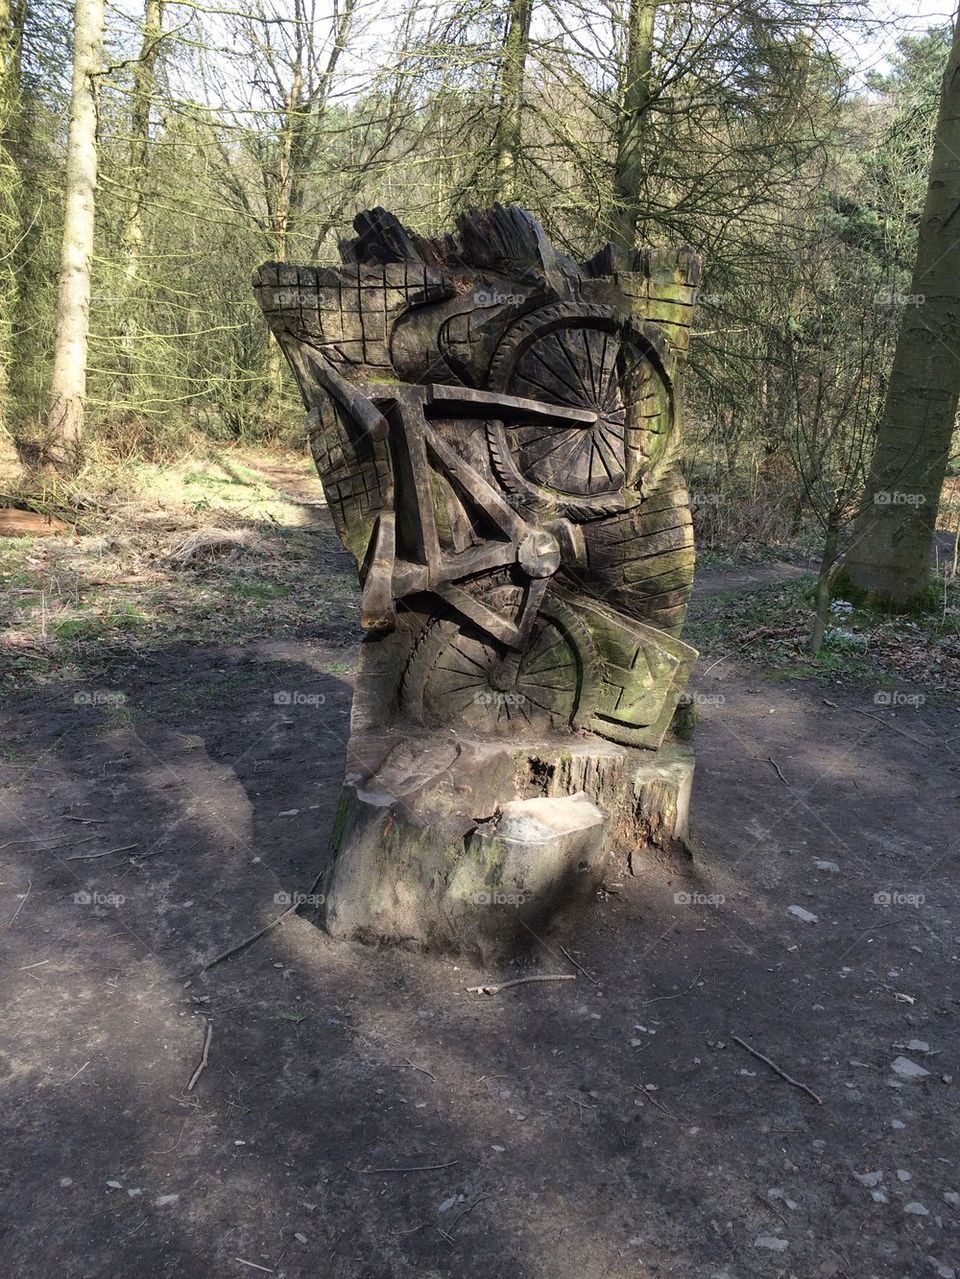 Wood carving on a tree stump